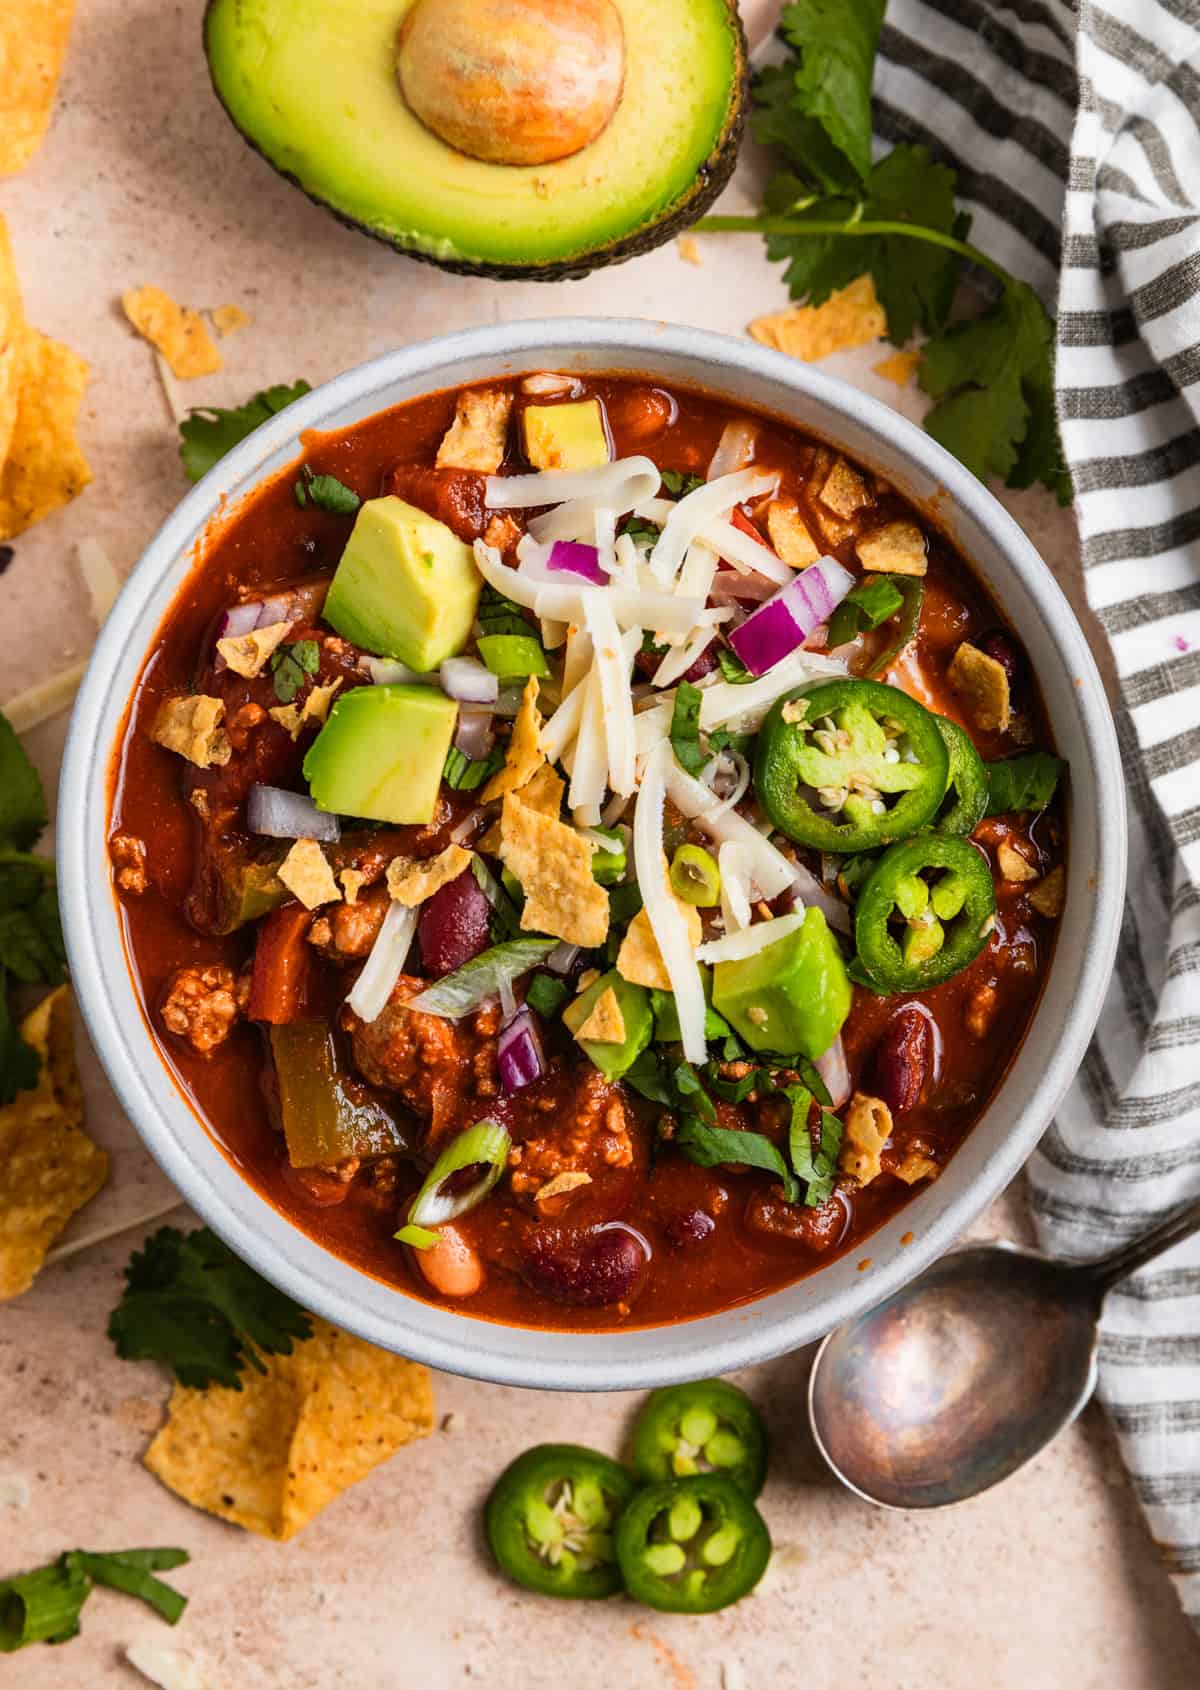 Overhead view of bowl of simple turkey chili topped with cilantro, avocado, corn chips and cheese.